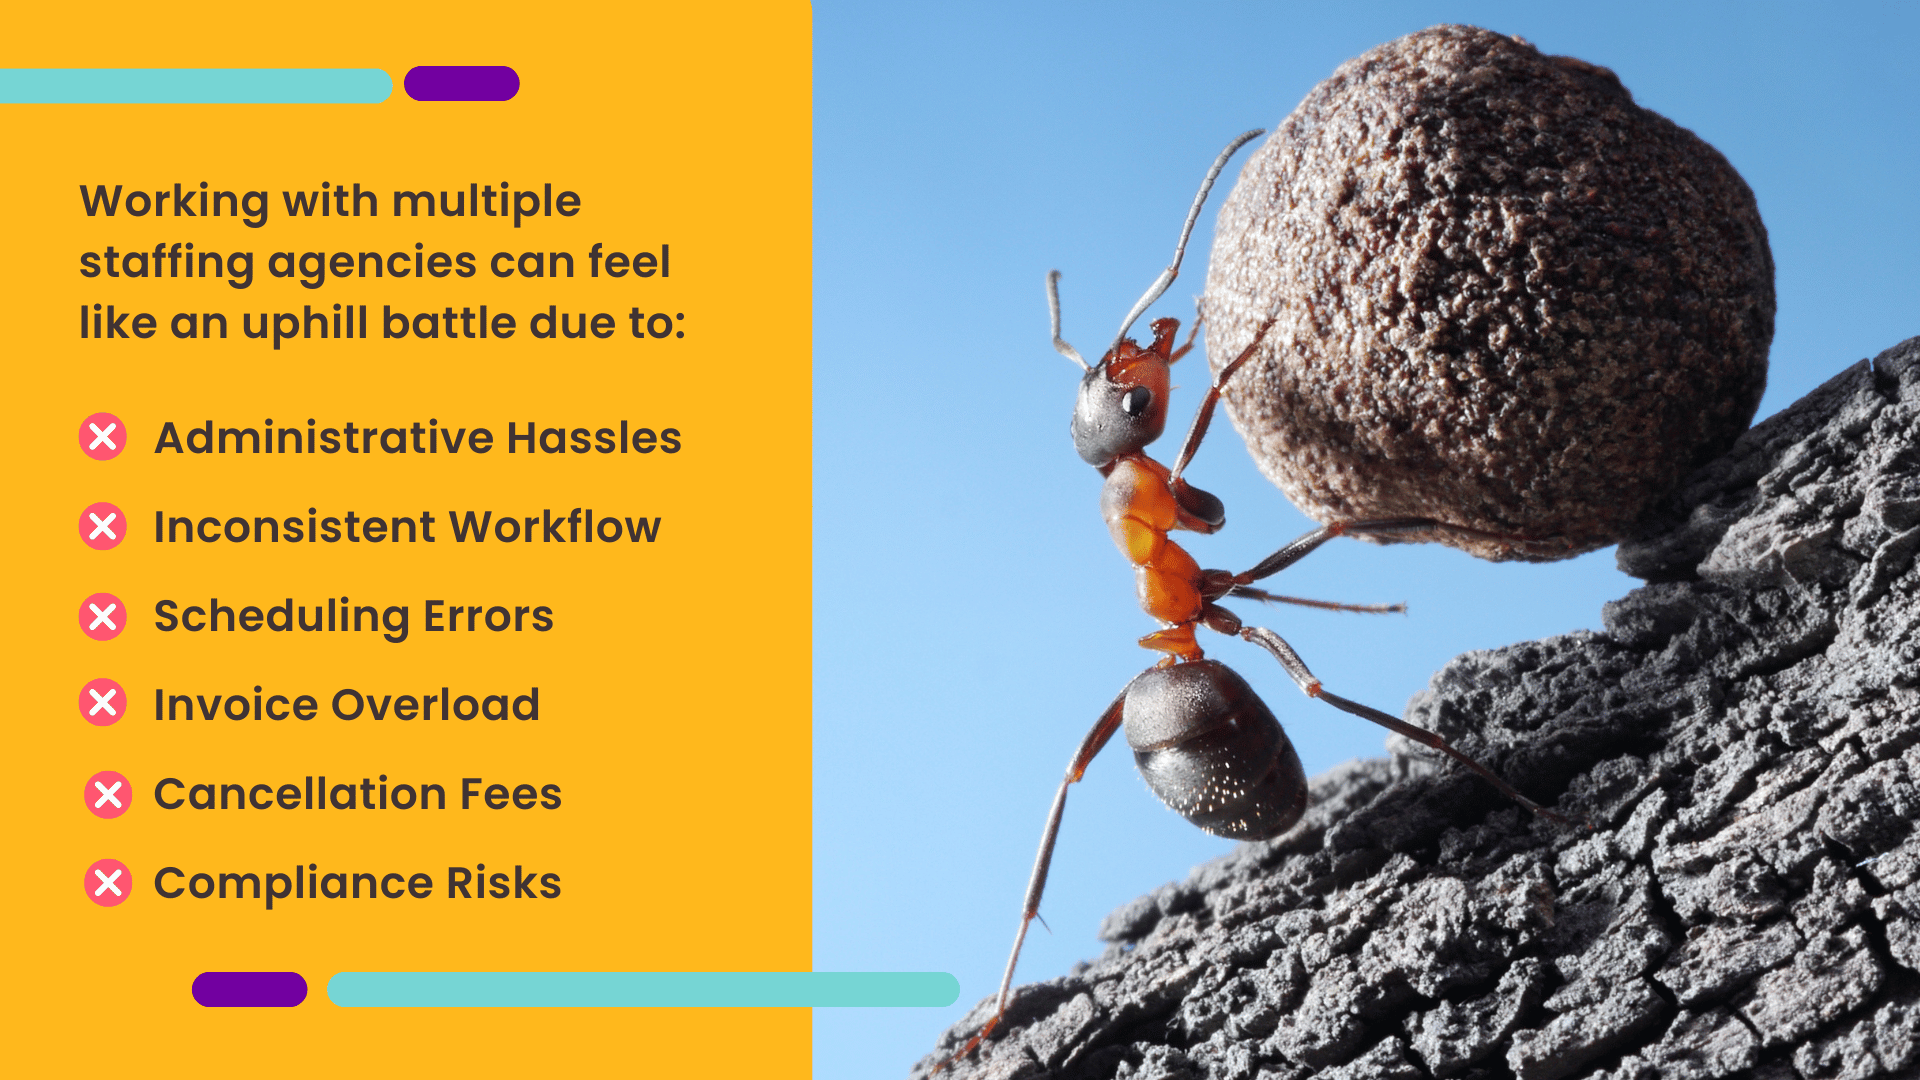 An image of an ant pushing a large rock up a hill demonstrates how working with multiple staffing agencies can feel like an uphill battle.  